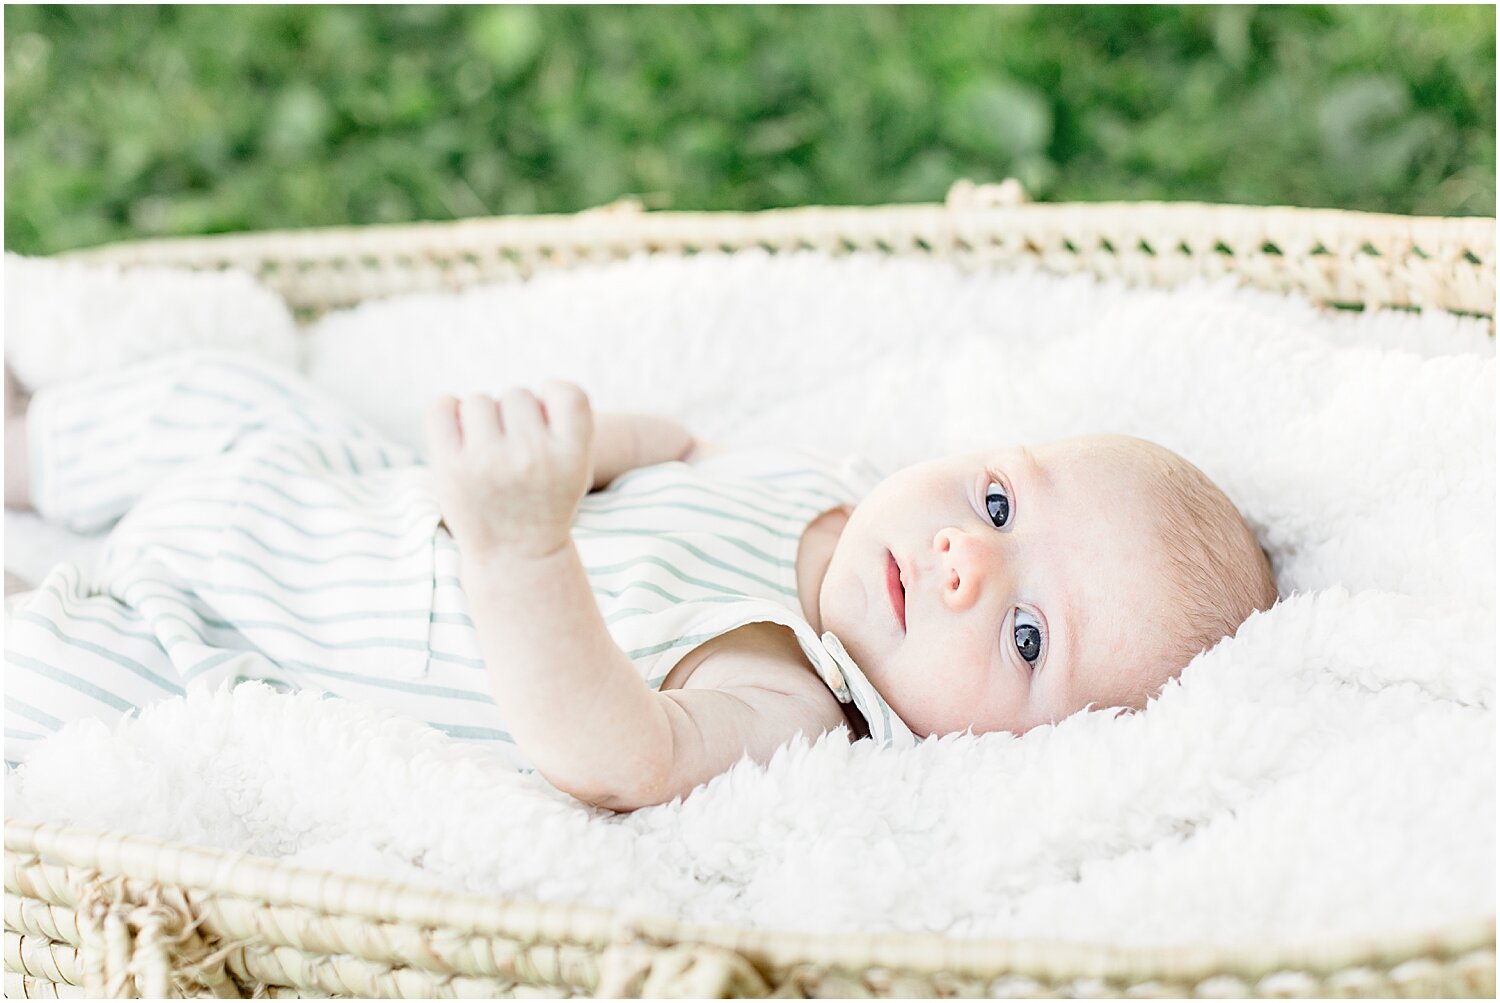 Outdoor newborn photoshoot using Moses basket. Photos by Connecticut Baby Photographer, Kristin Wood Photography.